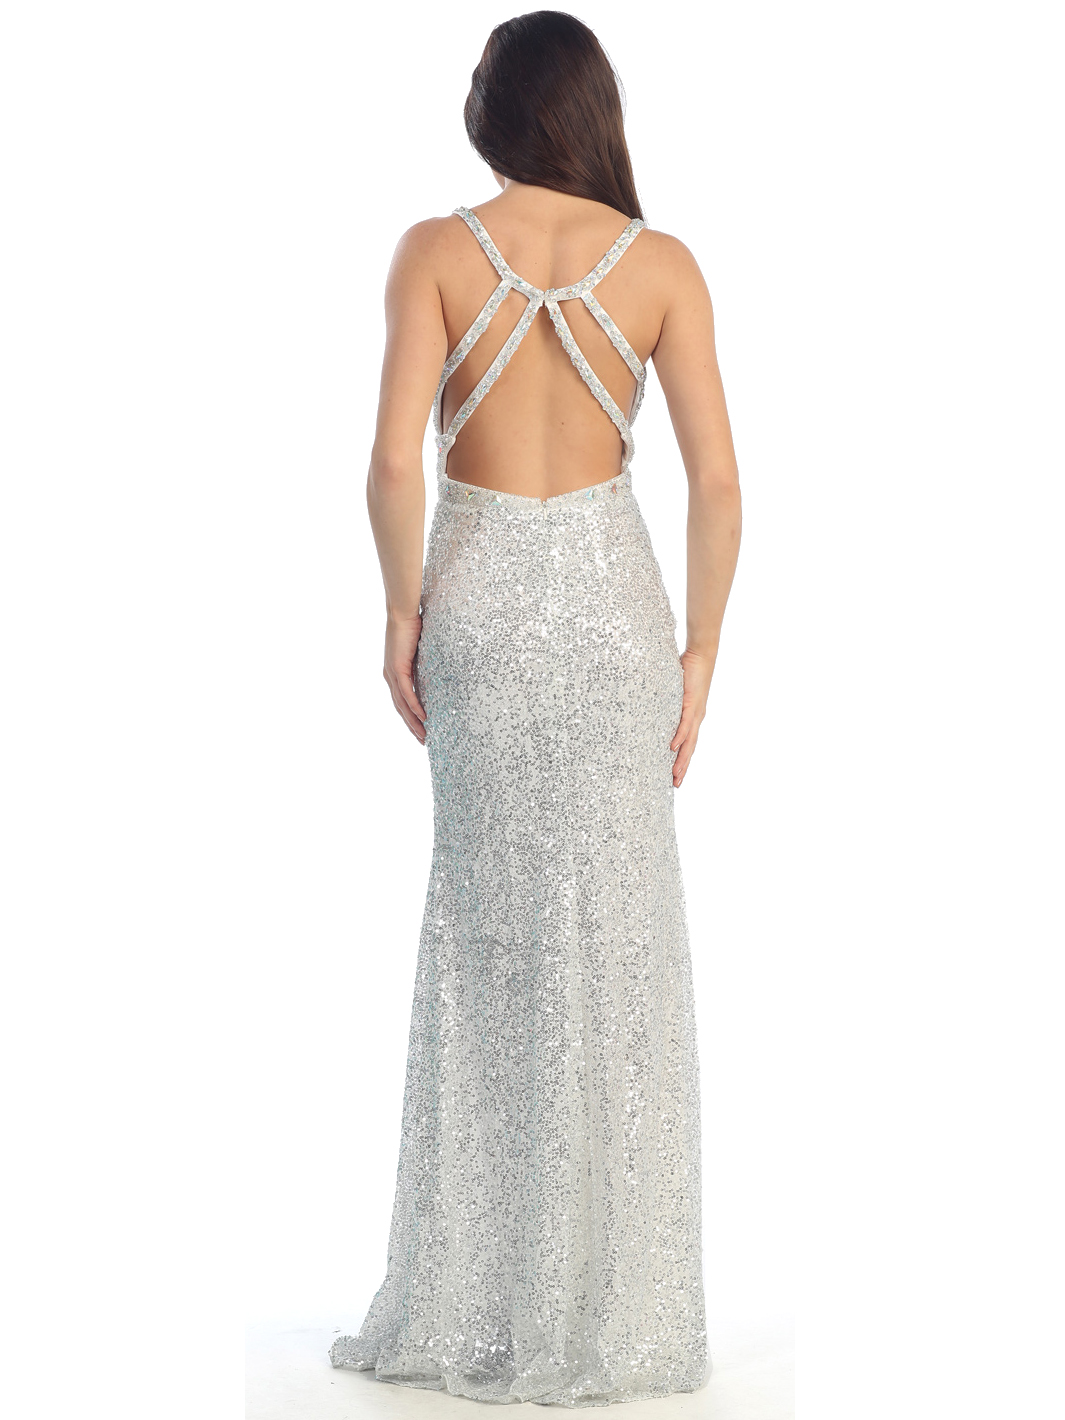 Silver And White Sequin Dress - Always In Fashion For All Occasions